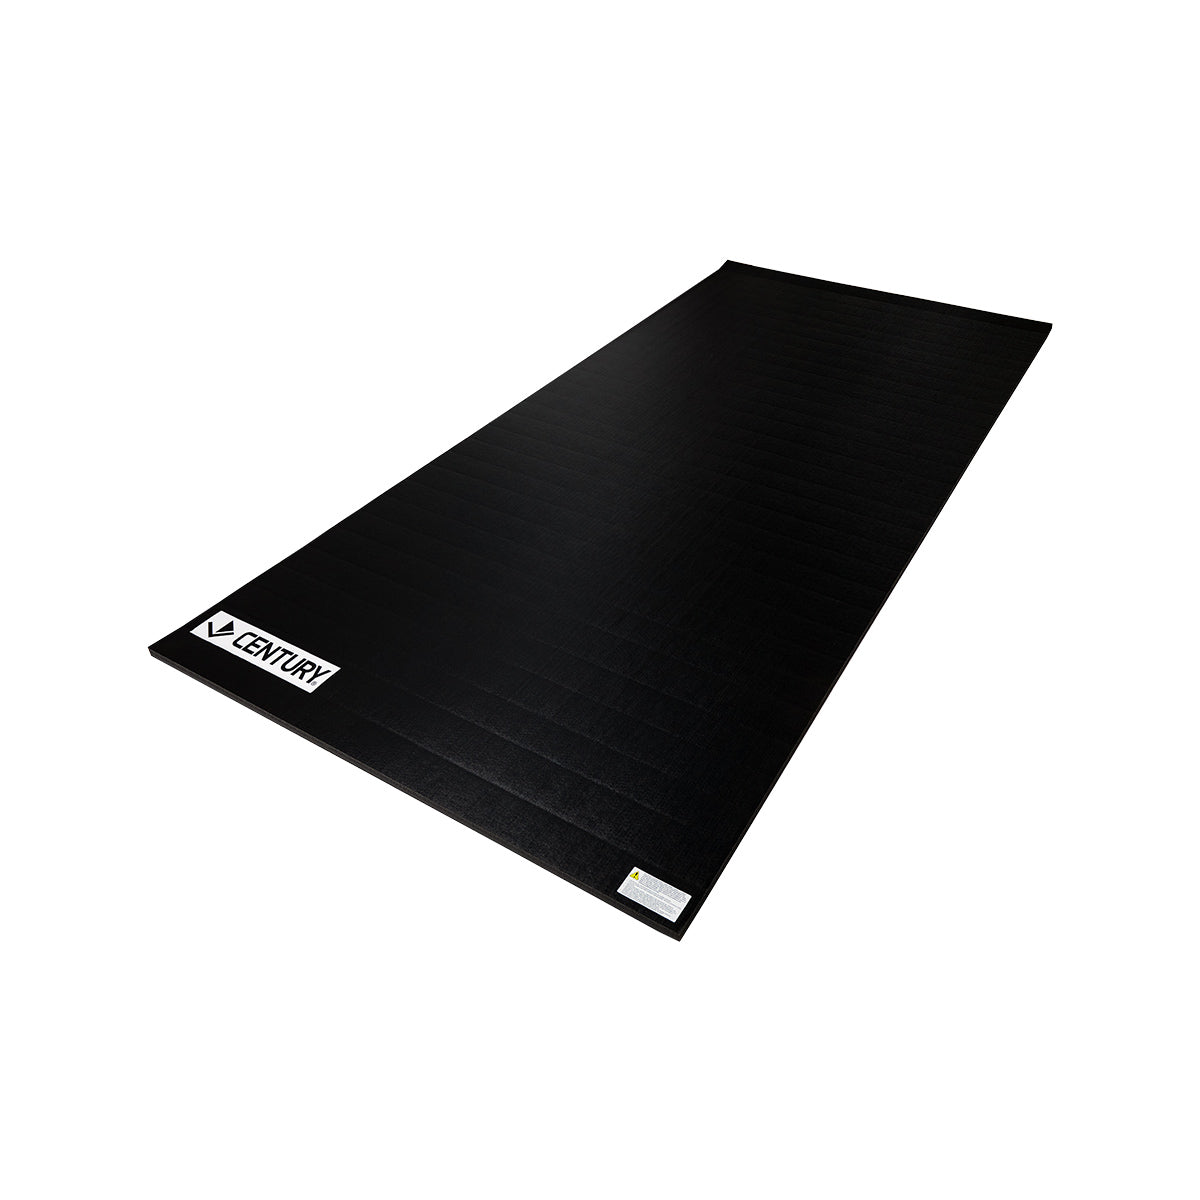 Smooth Home Rollout Mat - 5' x 10' x 1.25"